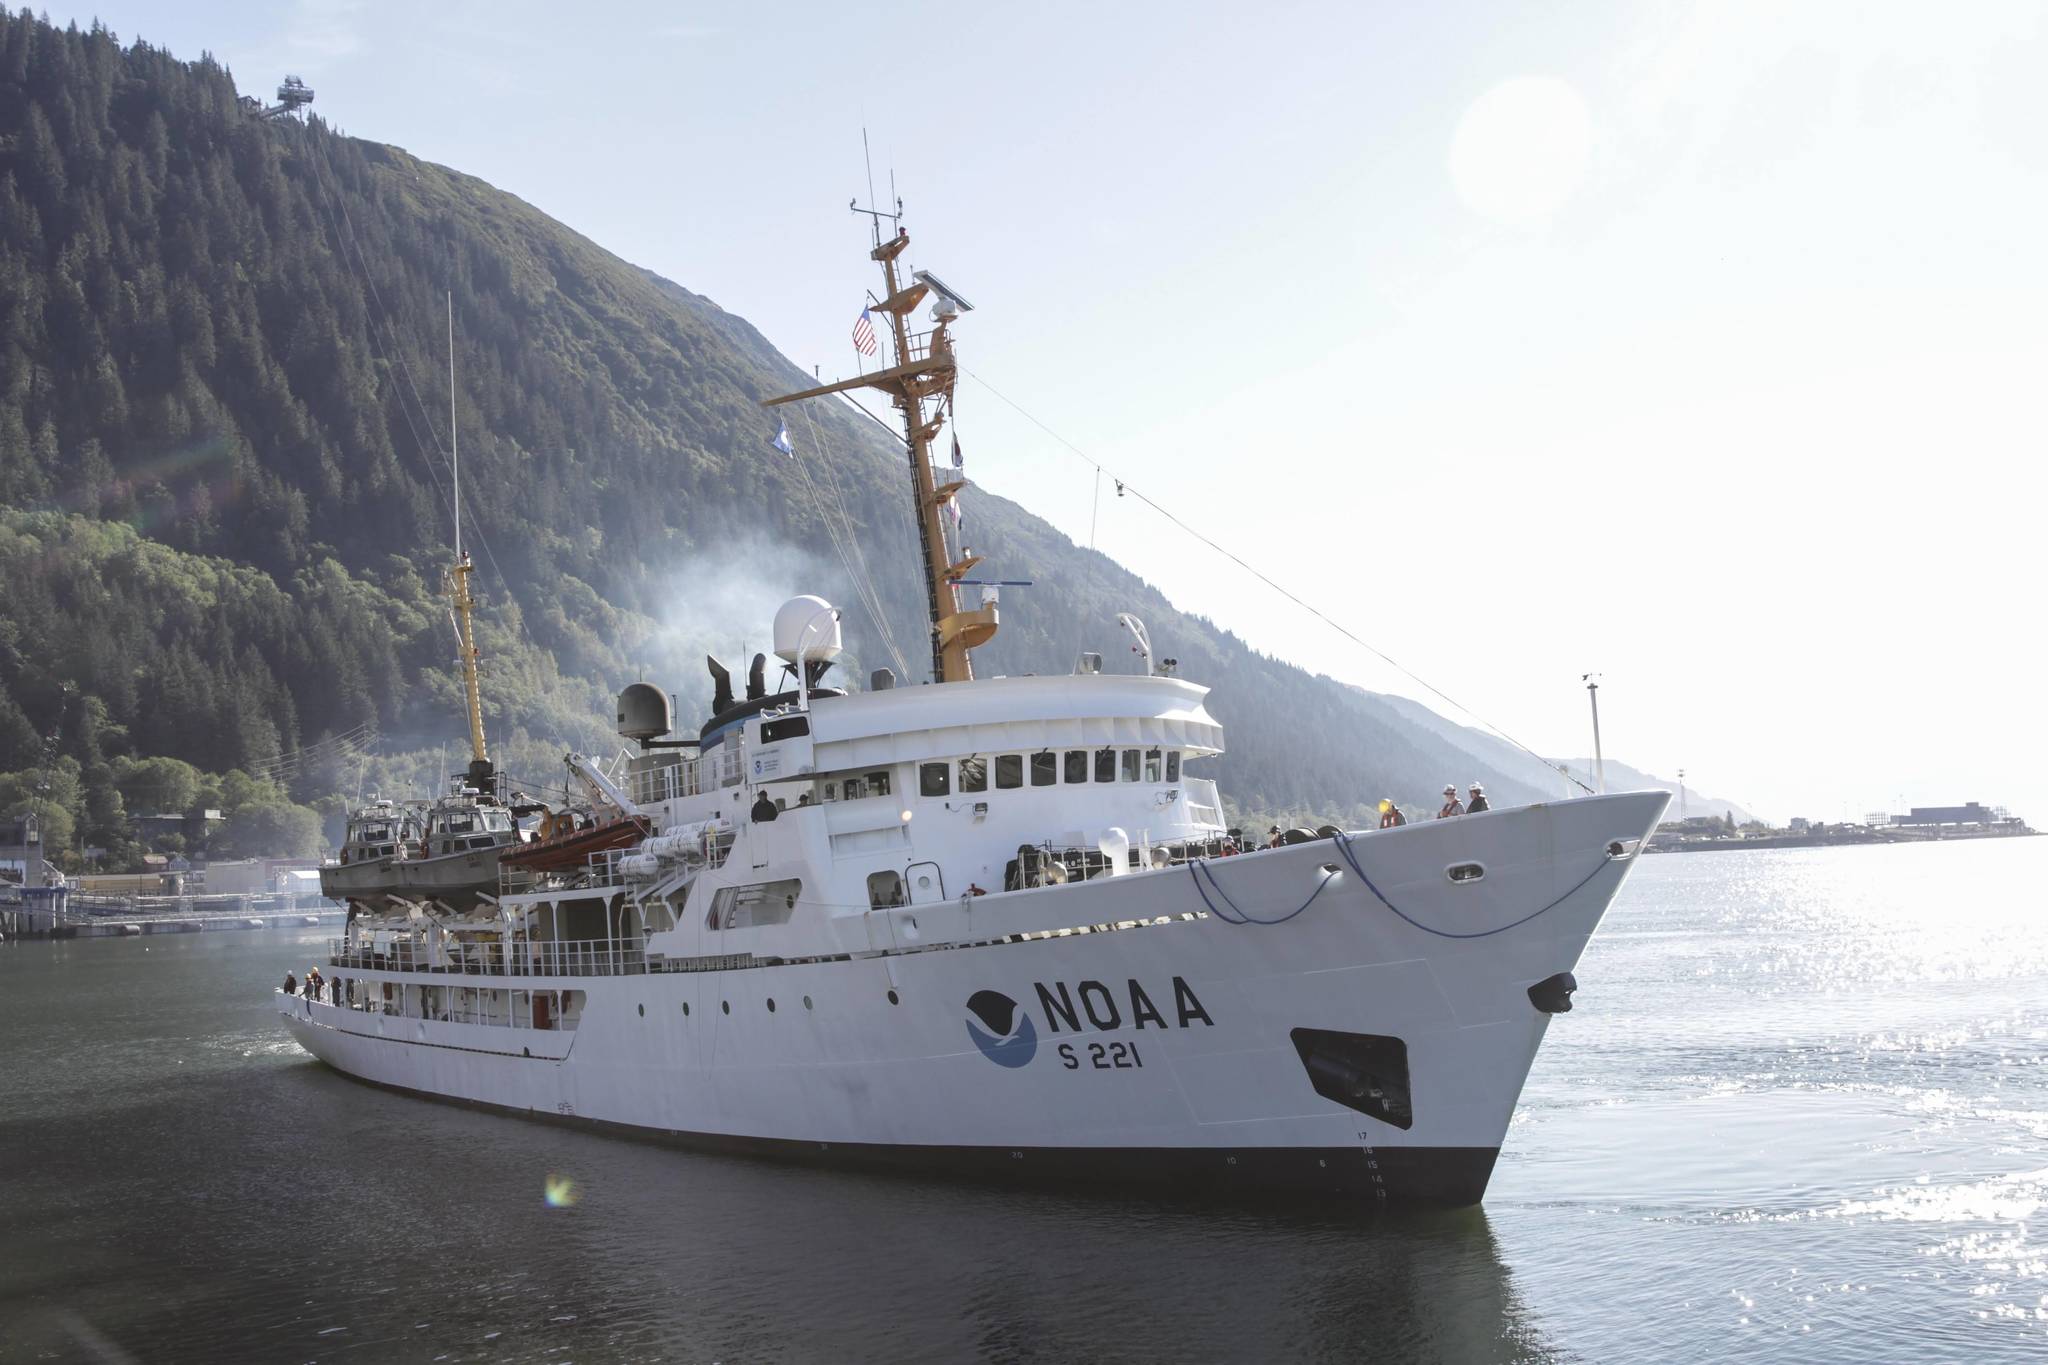 The National Oceanic and Atmospheric Administration vessel Rainier pulls into port at Coast Guard Station Juneau on Sept. 16, 2020 for rest and replenishment of stores. (Michael S. Lockett / Juneau Empire)